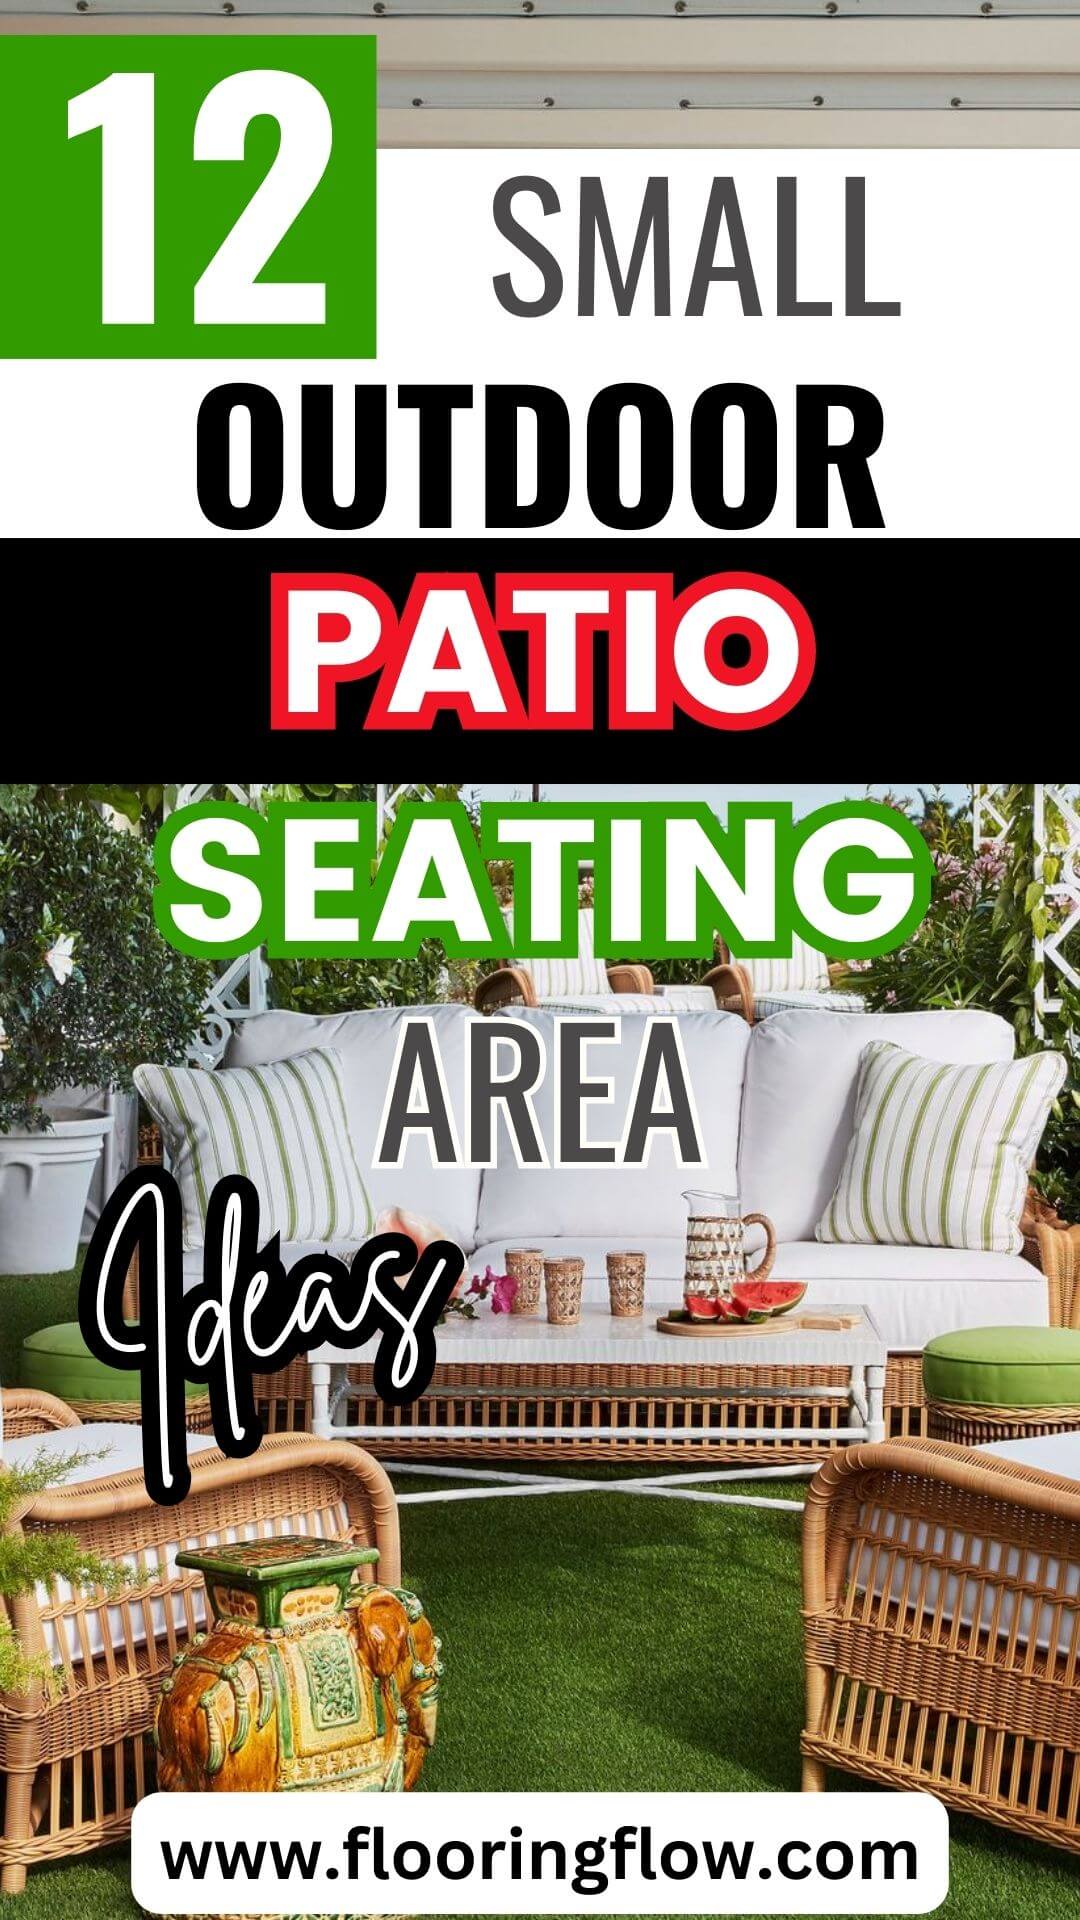 Small Outdoor Patio Seating Areas Ideas